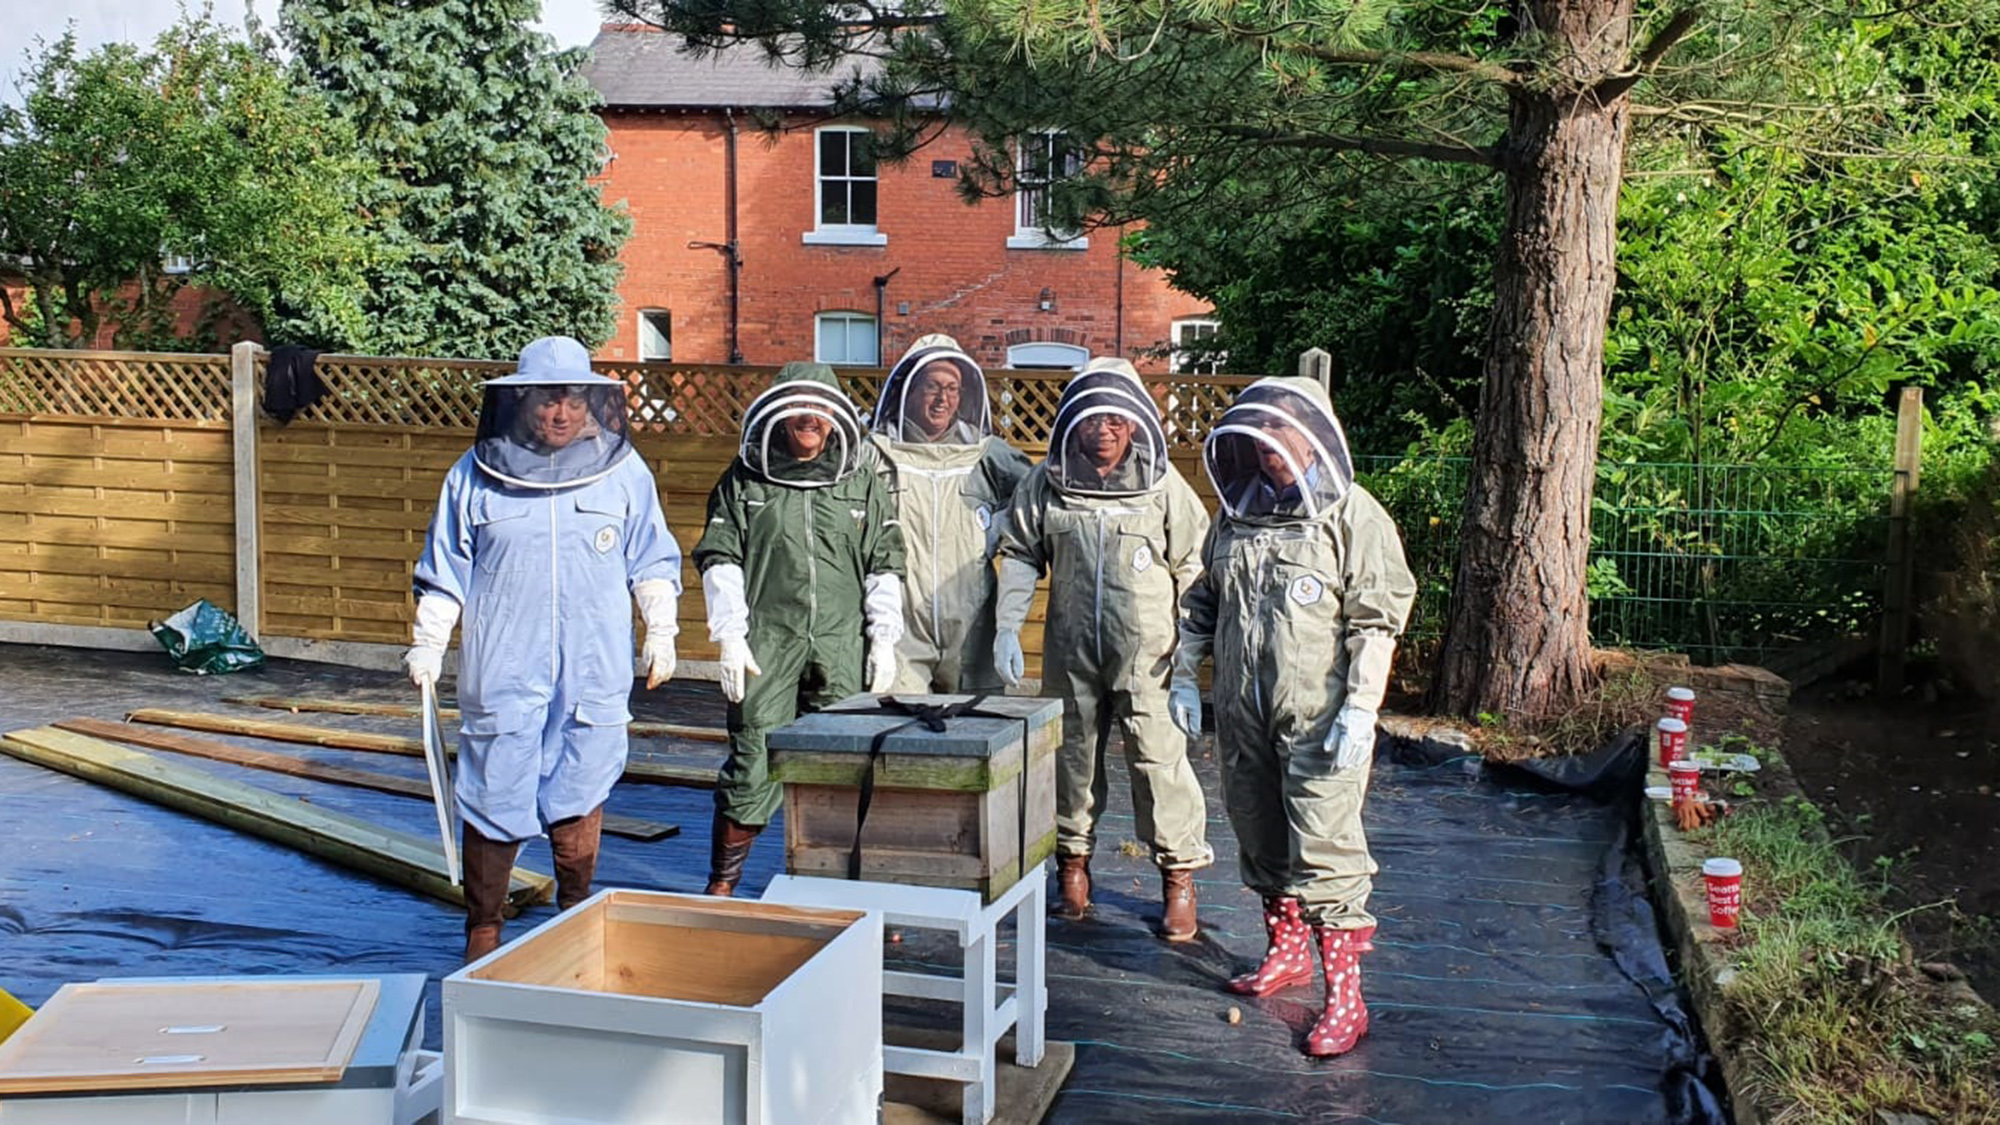 The University of Chester Beehives